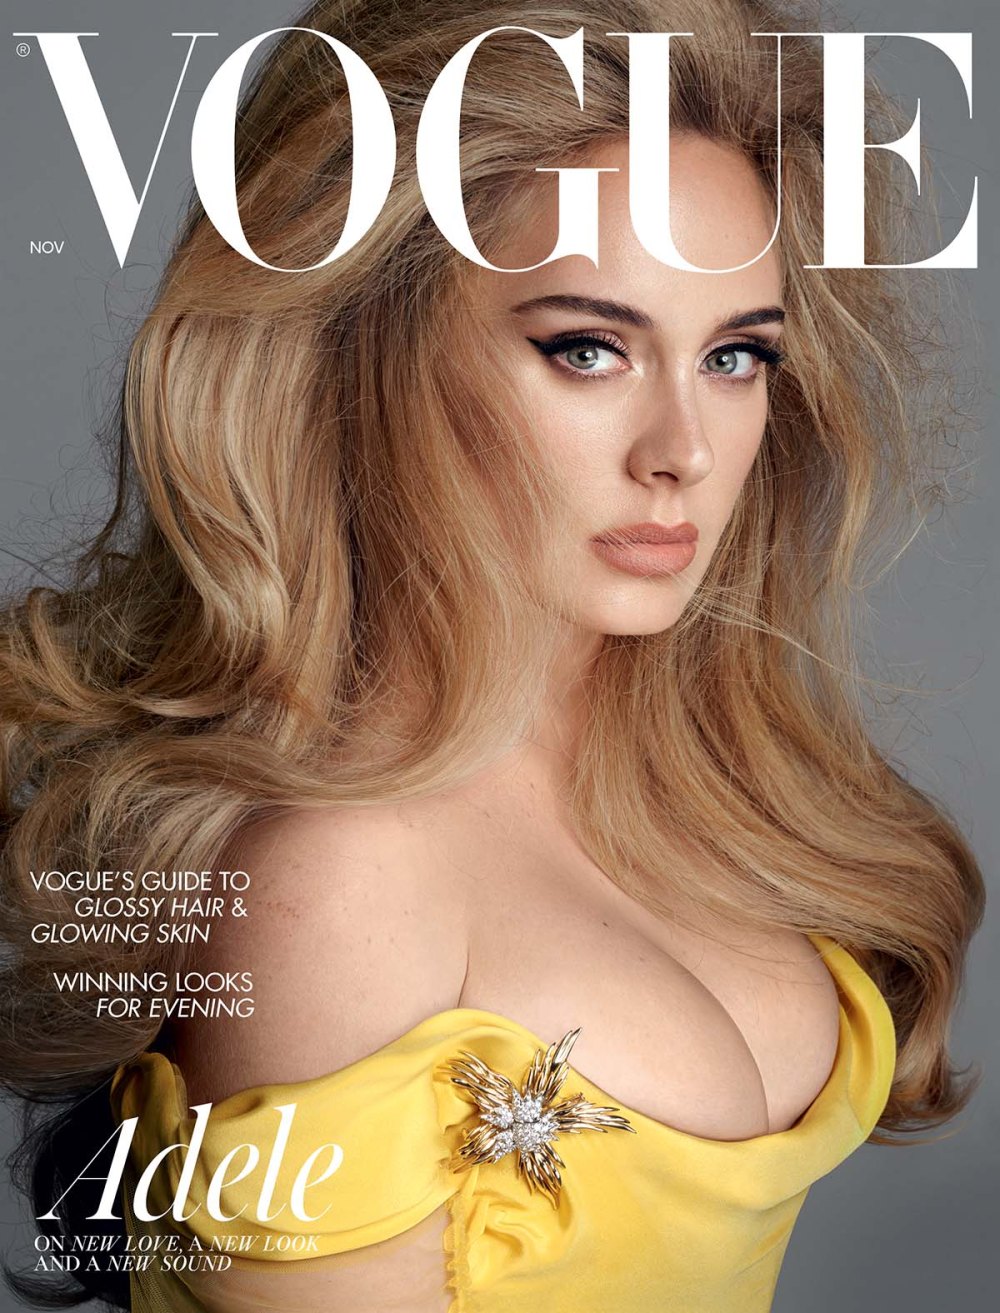 Adele Channels a Sexy Version of Princess Belle on the Cover of 'British Vogue' See the Pics!